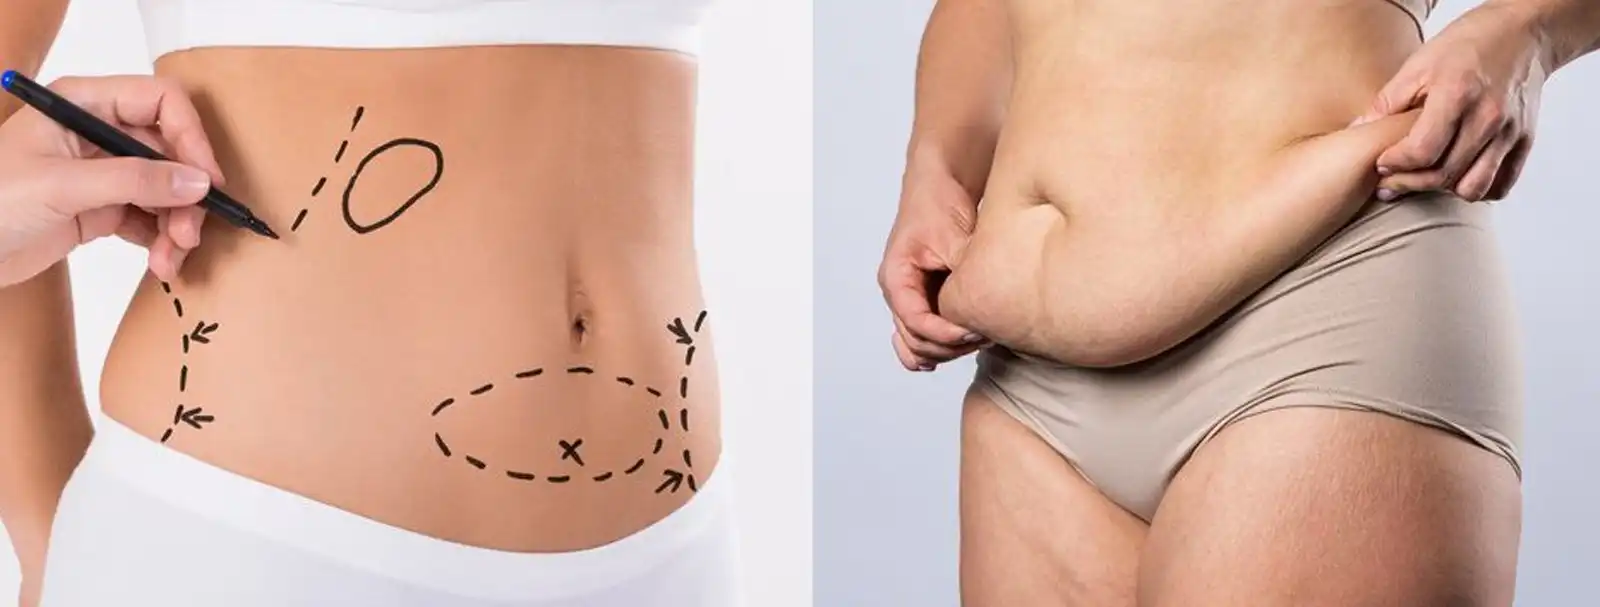 How To Know You Are A Good Tummy Tuck Candidate? – Blog – Profile